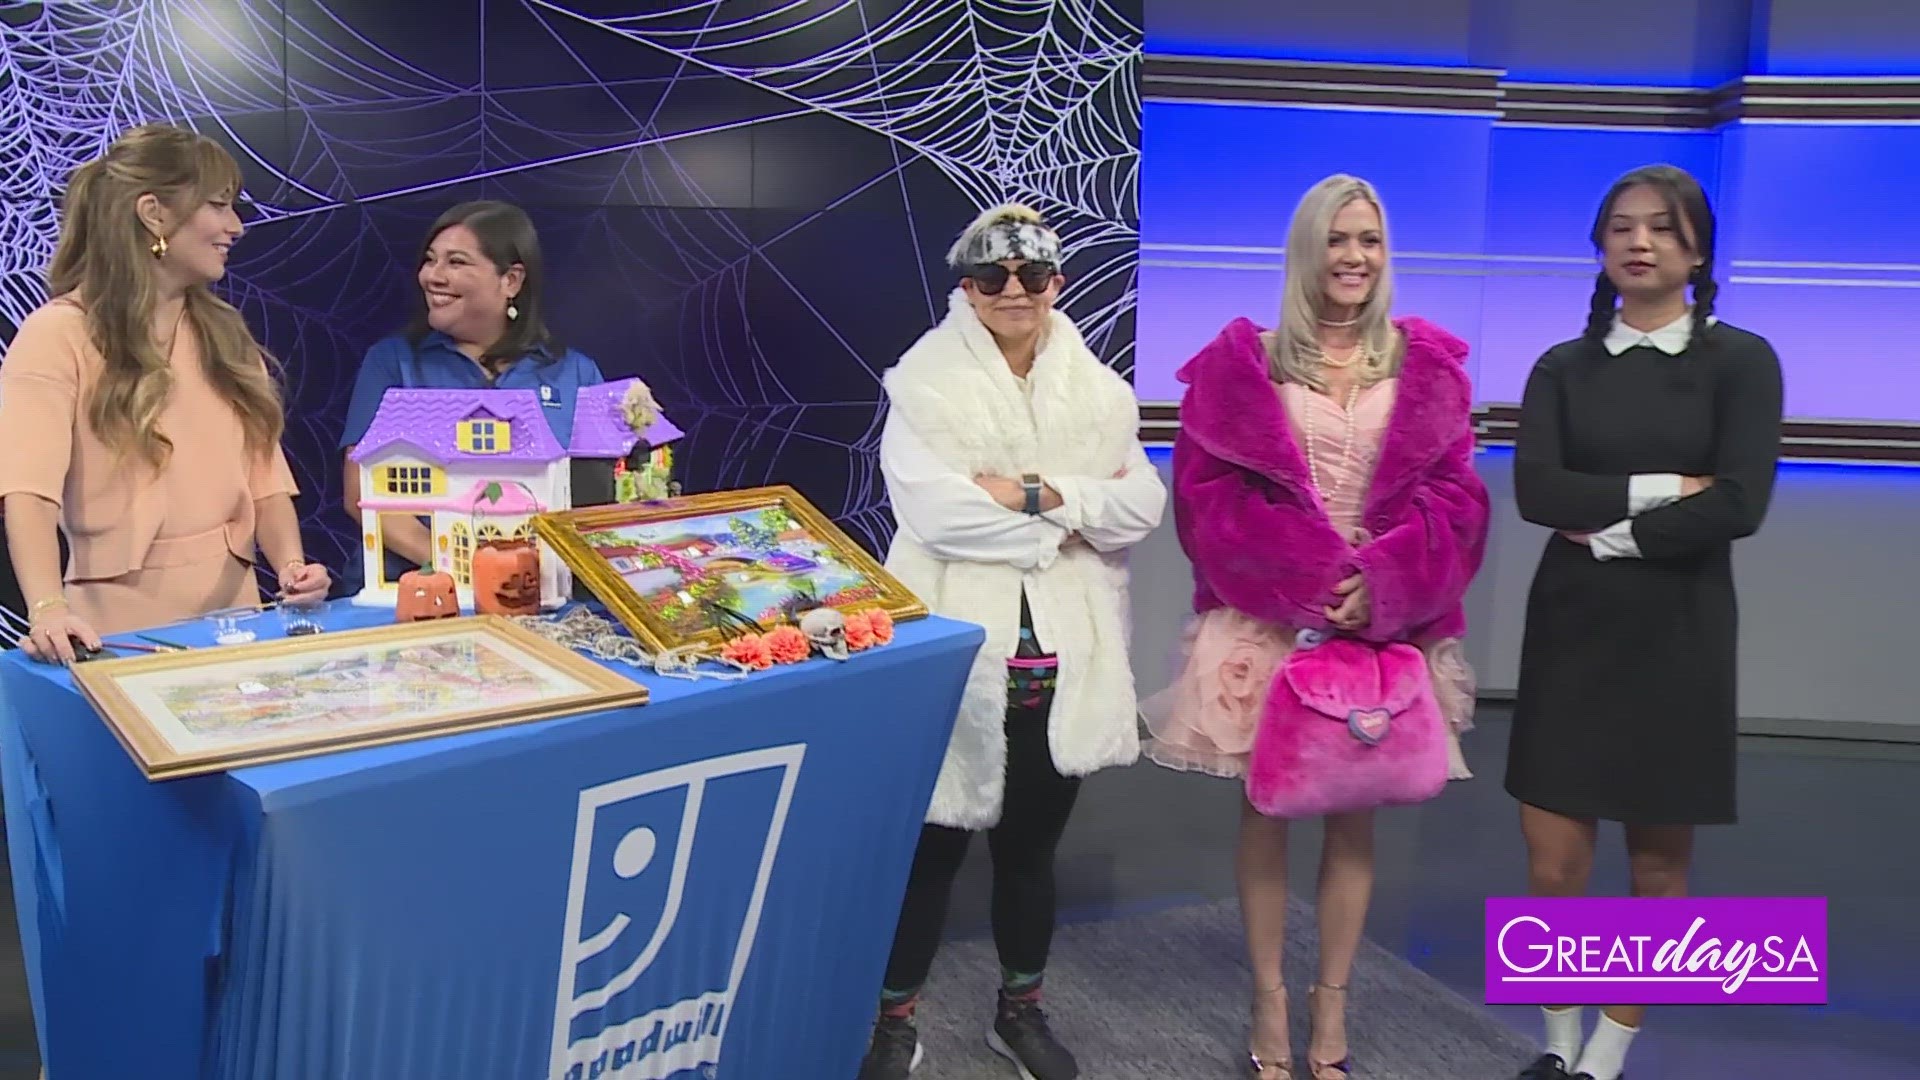 Libby Castillo with Goodwill shares how you can create fun Halloween inspirations on a budget.